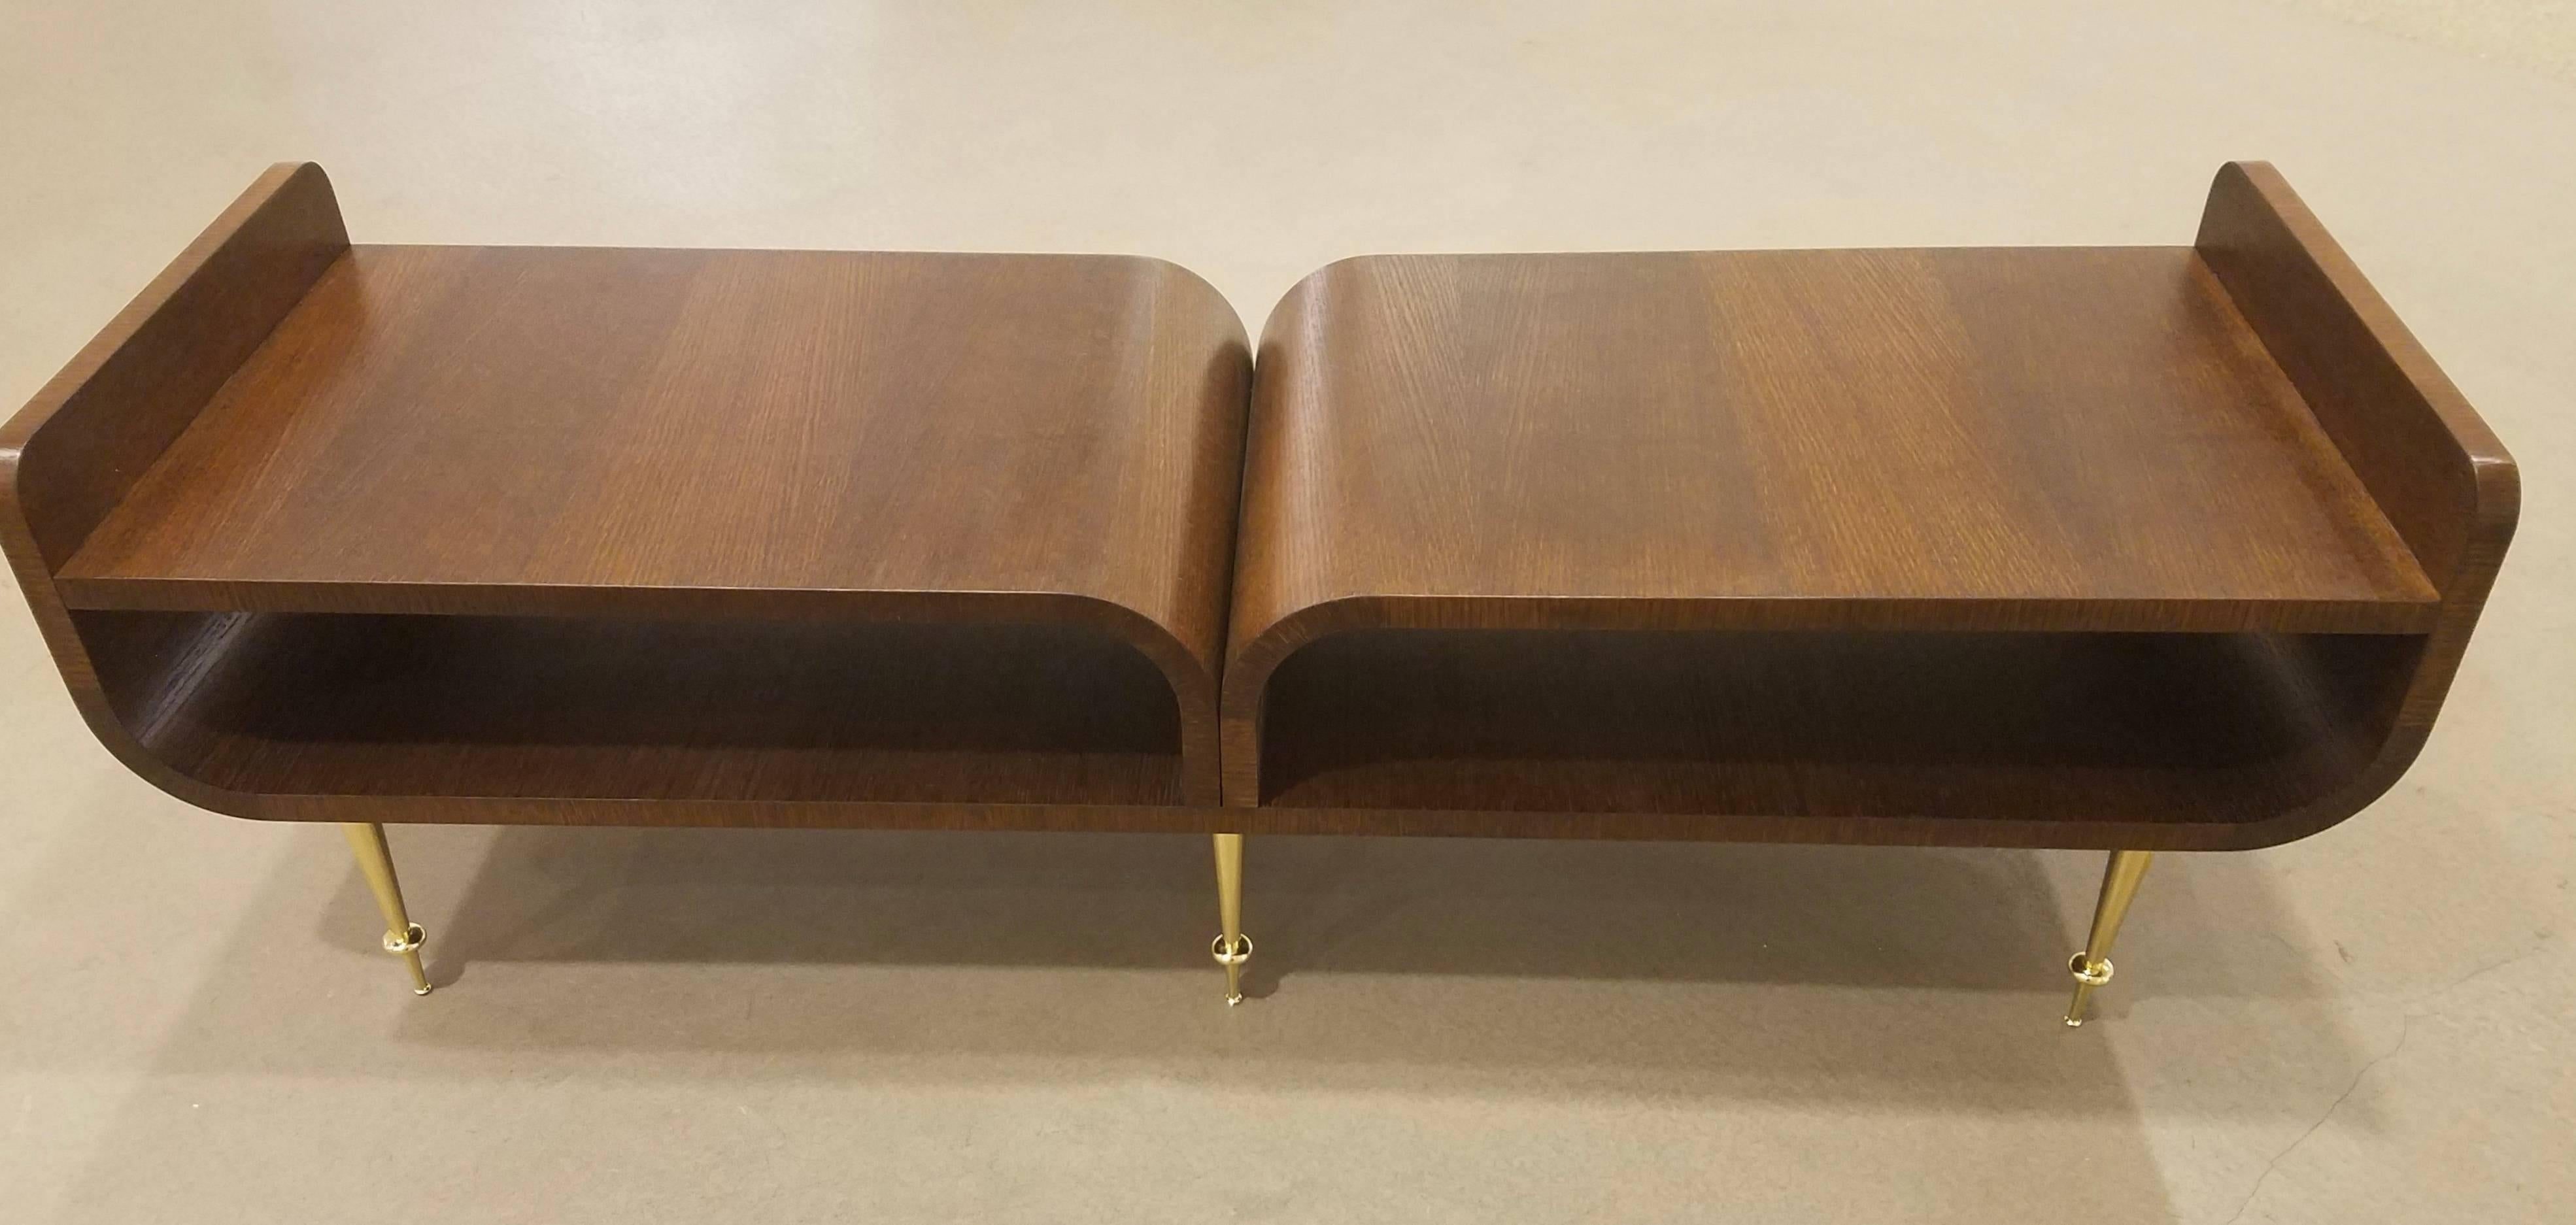 Limited Edition Italian Two-Tier Brown Wood Bench With Brass Legs In Excellent Condition For Sale In New York, NY